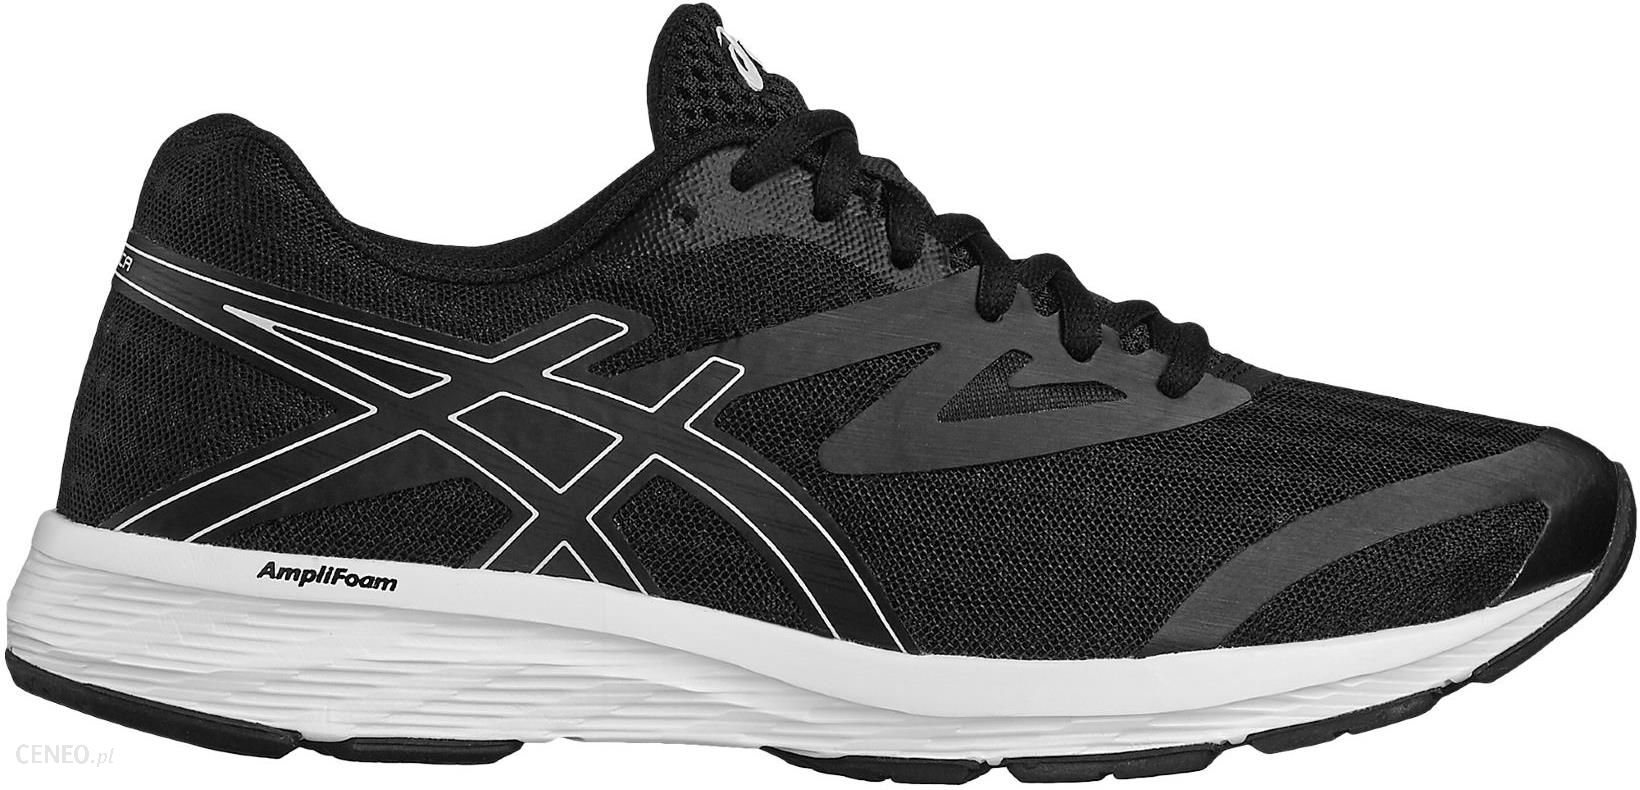 asics amplica t875n opinie,Limited Time 